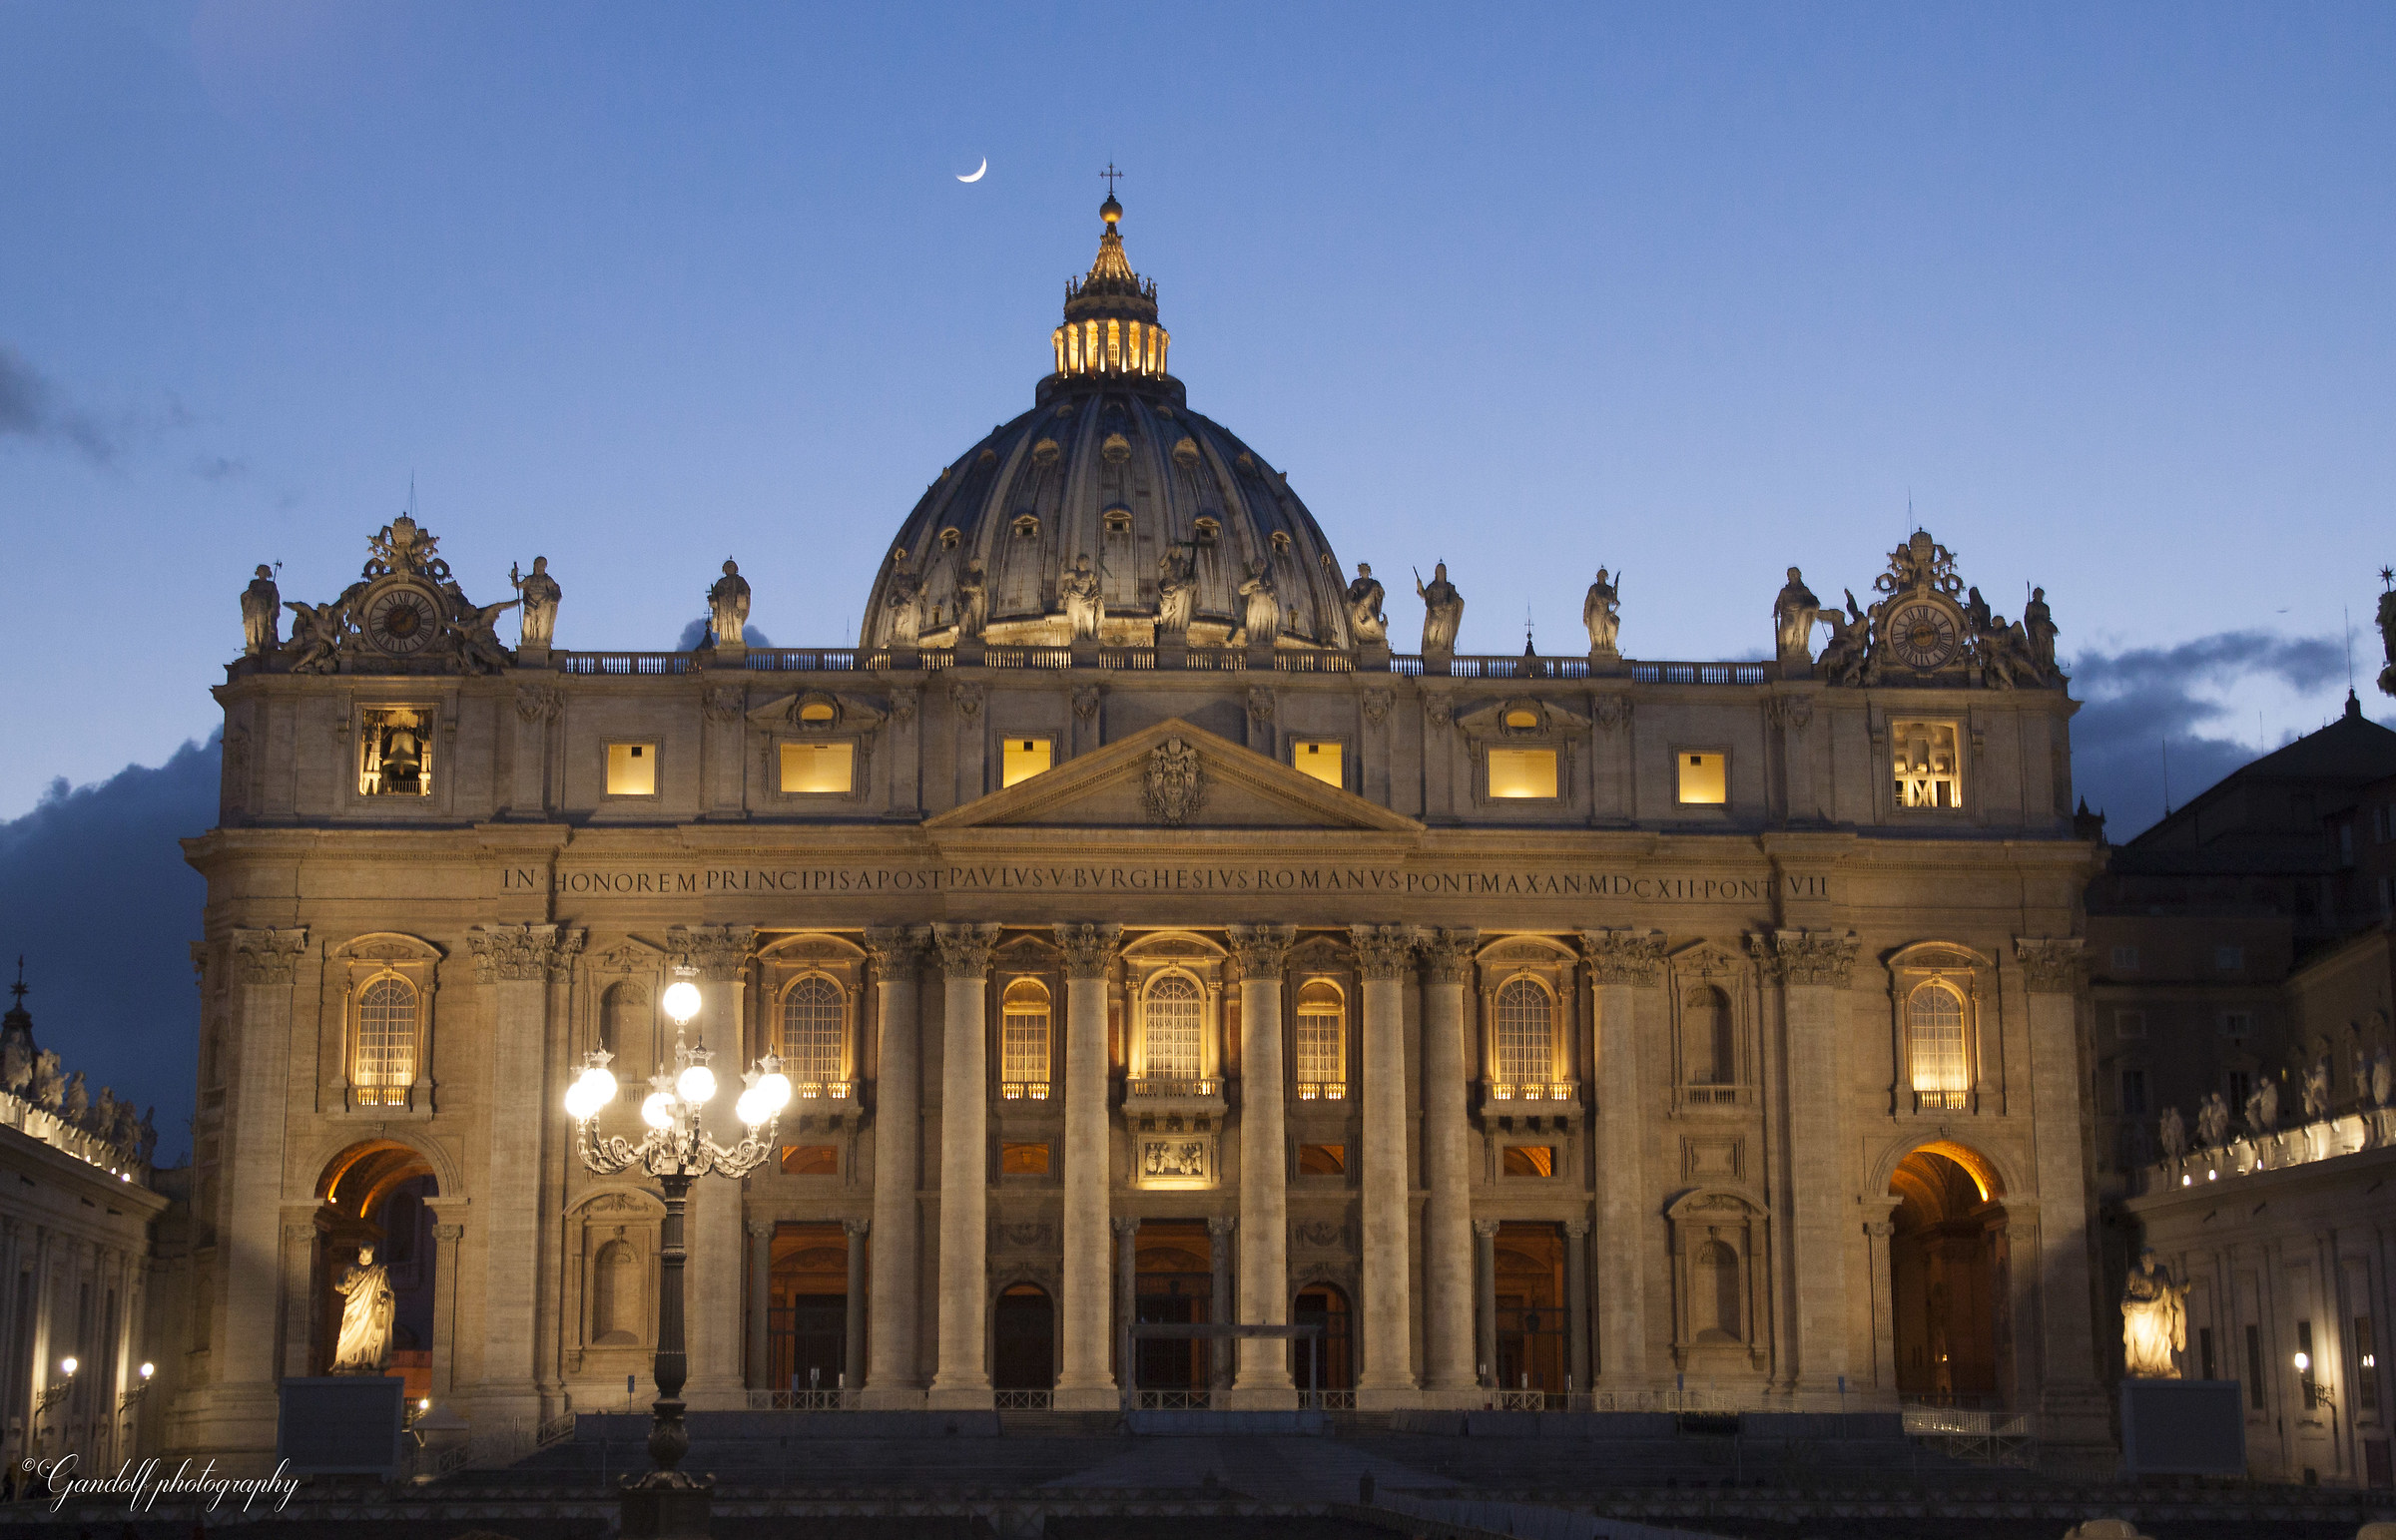 Blue hour at the Vatican...